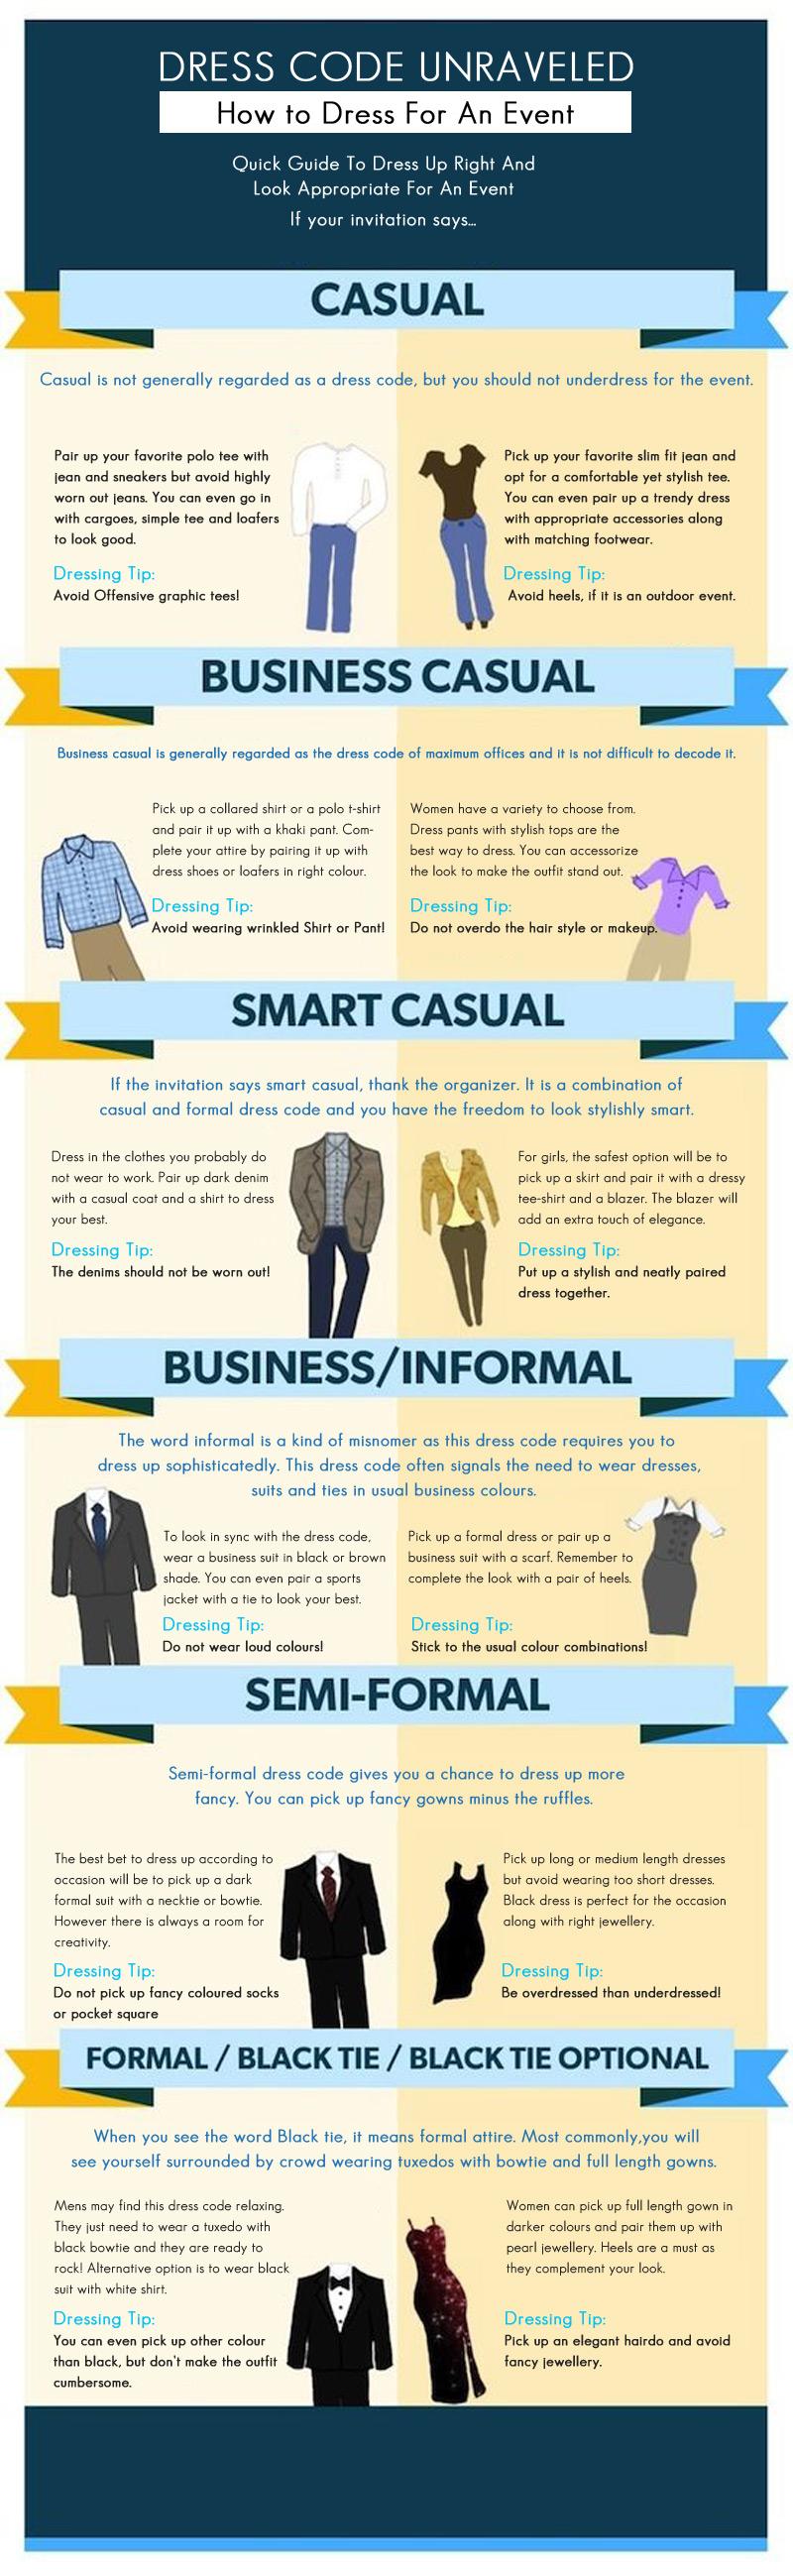 How To Dress For An Event | Visual.ly